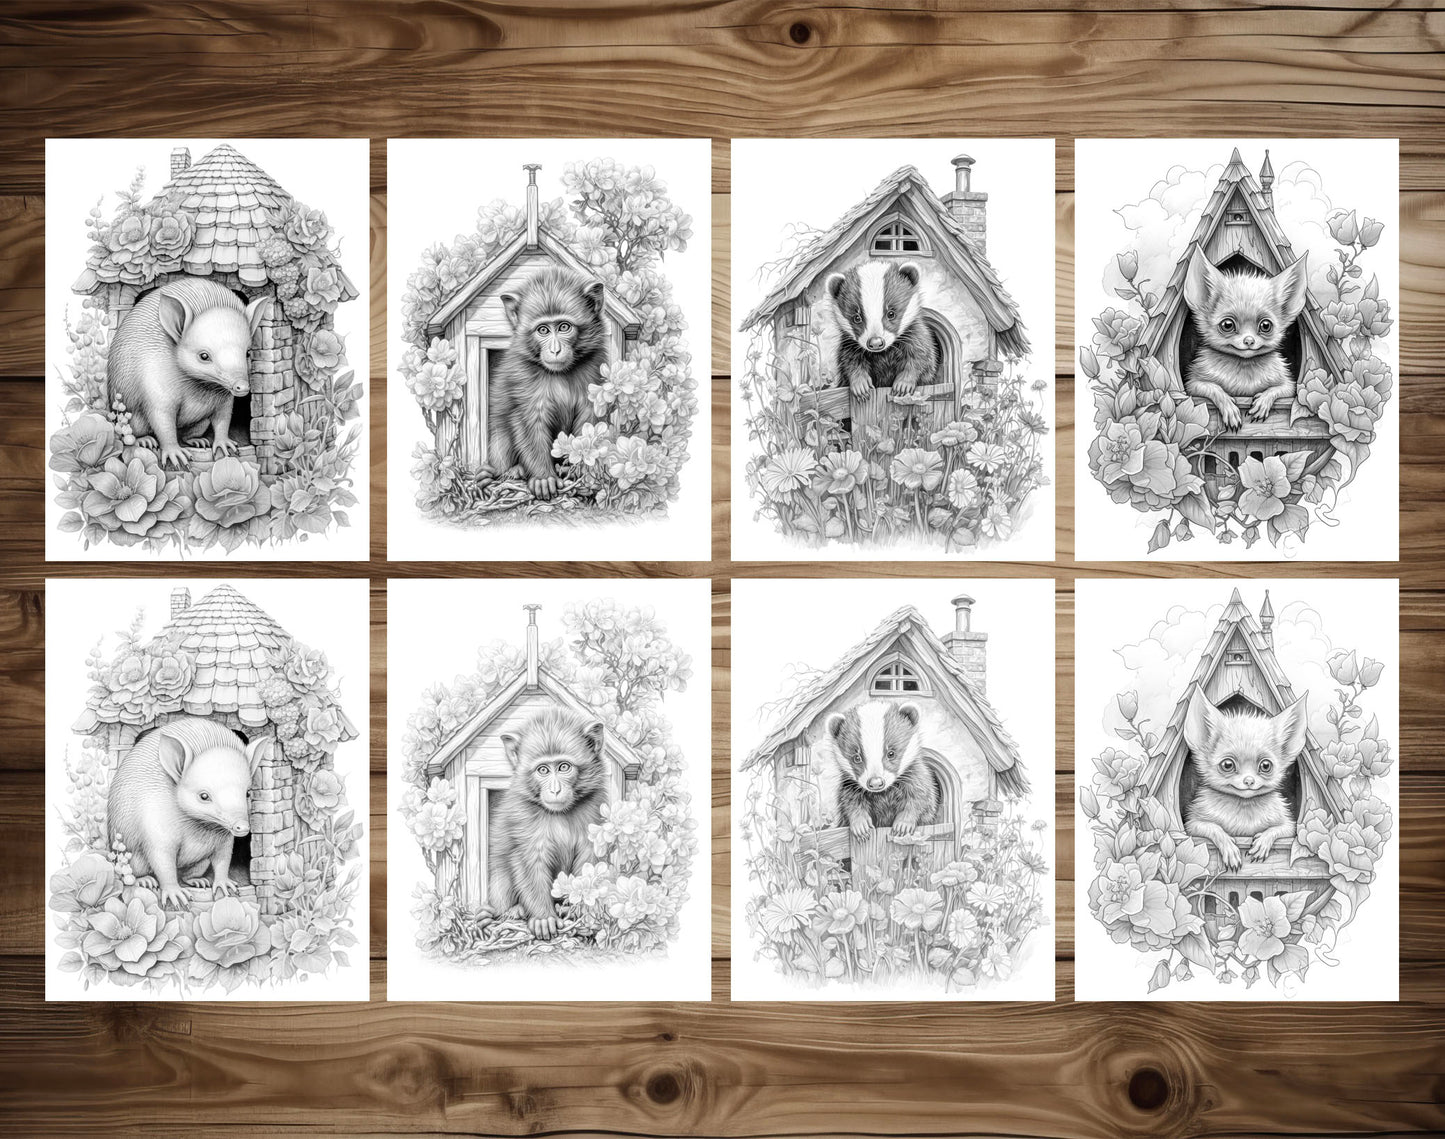 101 Baby Animal Home Grayscale Coloring Pages - Instant Download - Printable Dark/Light